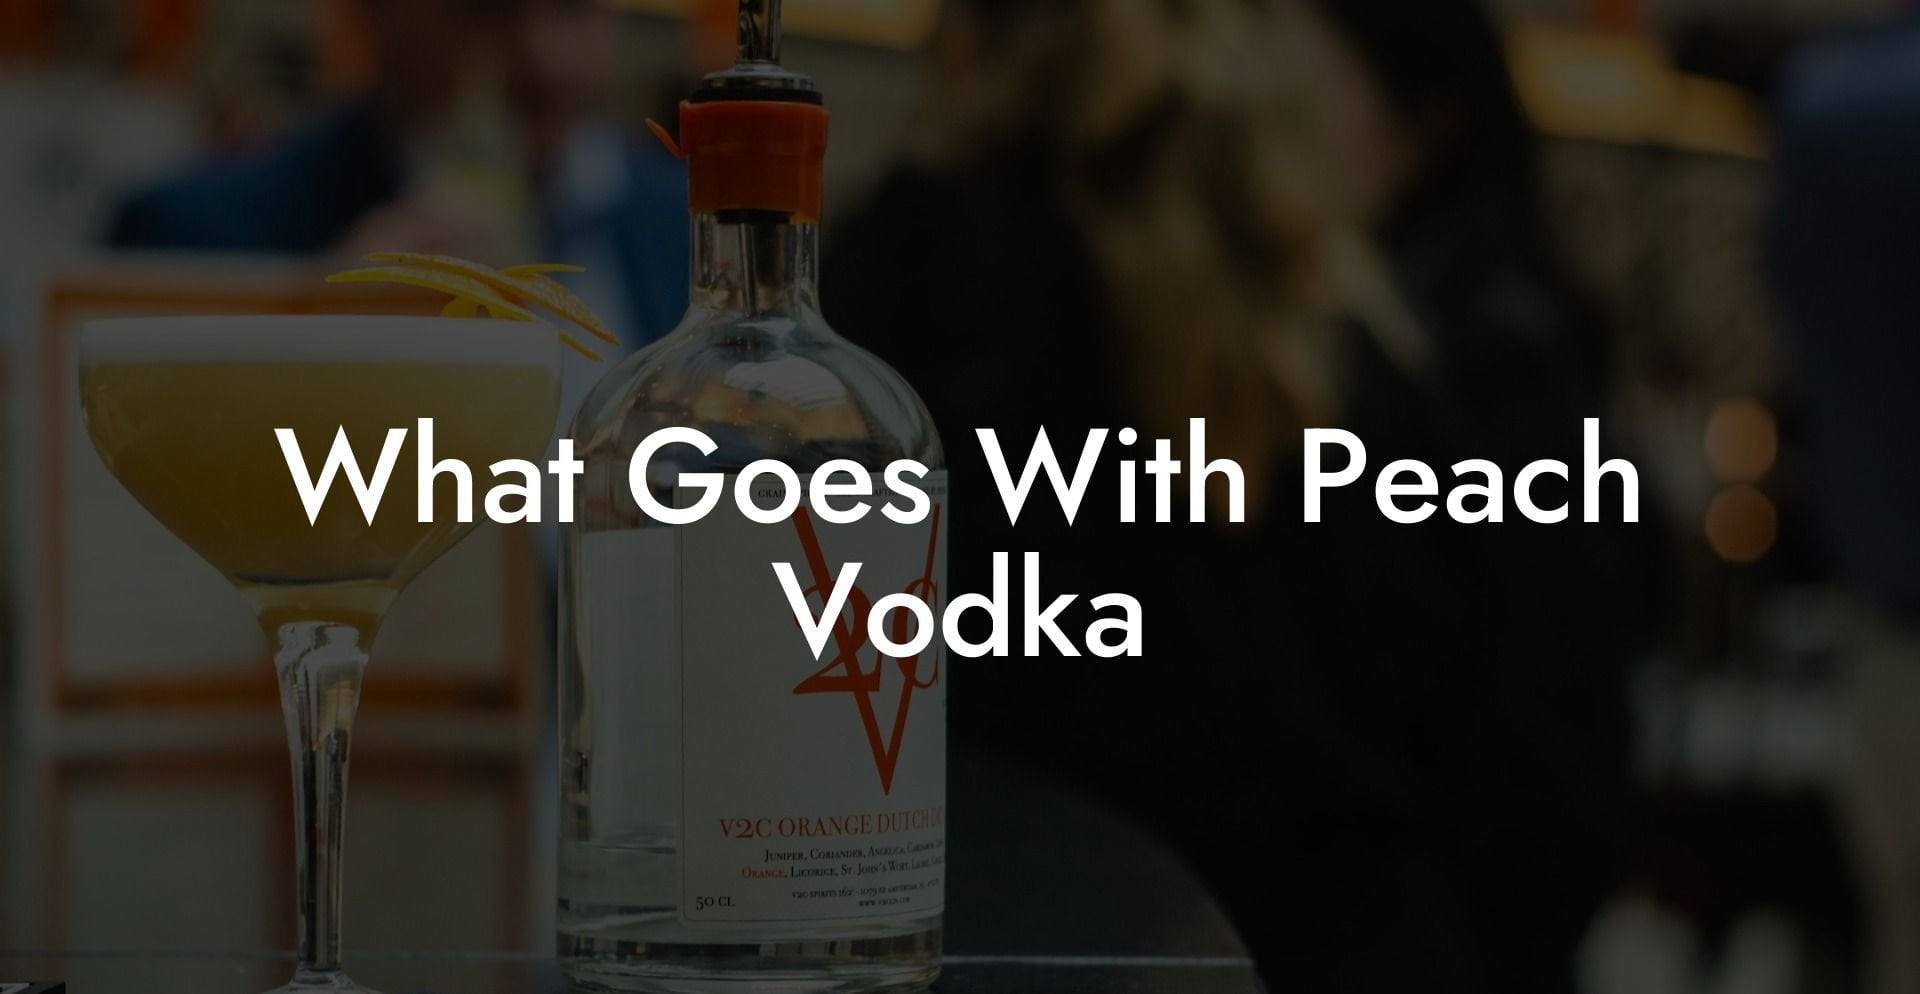 What Goes With Peach Vodka